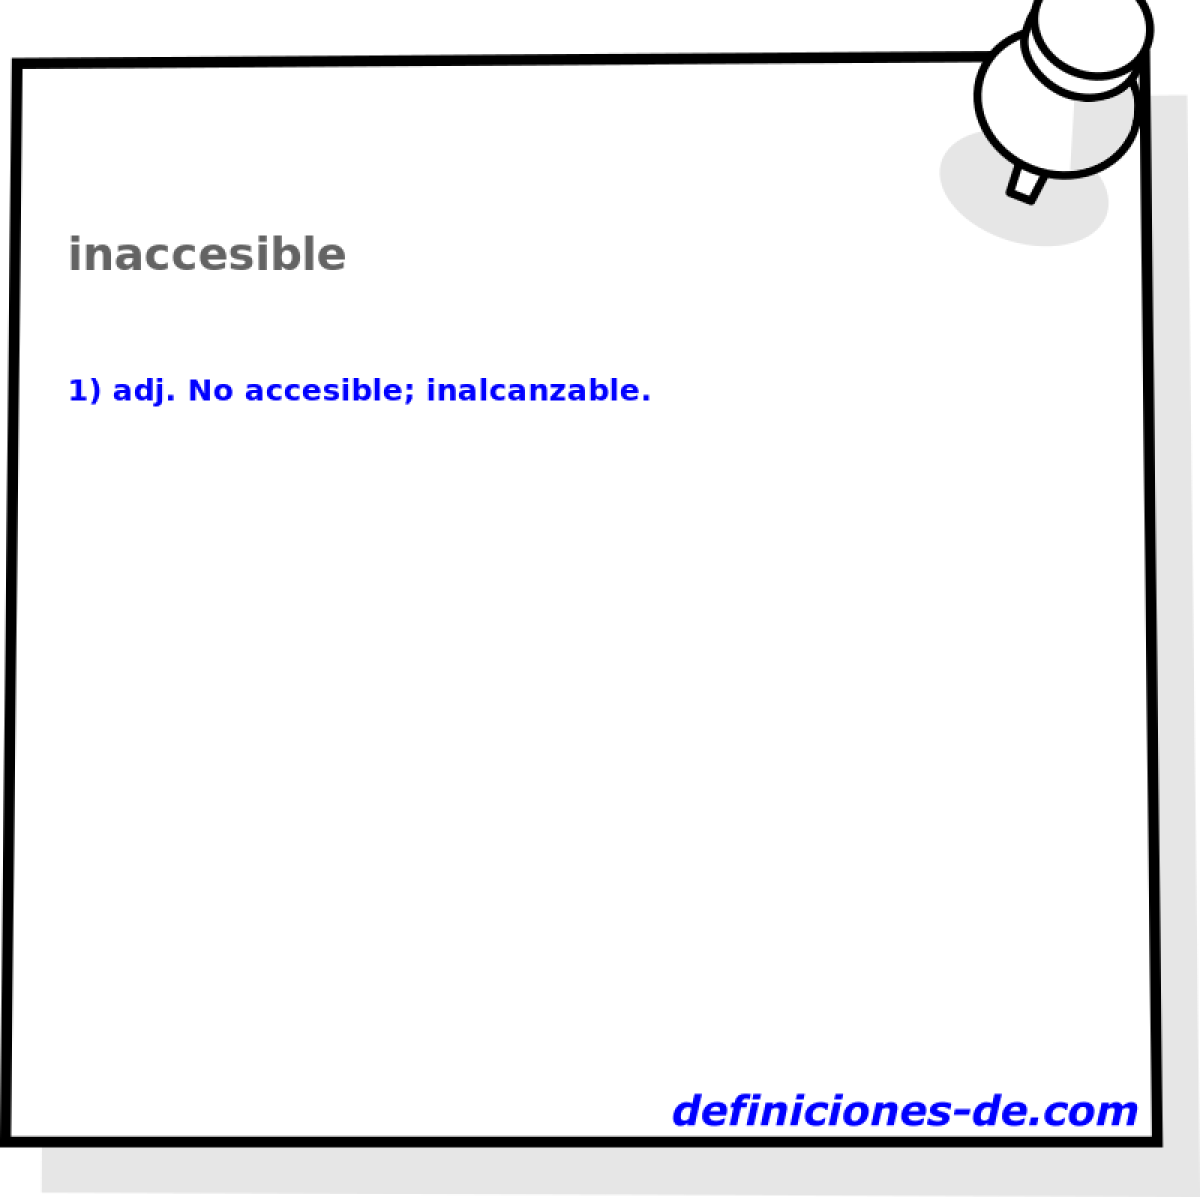 inaccesible 